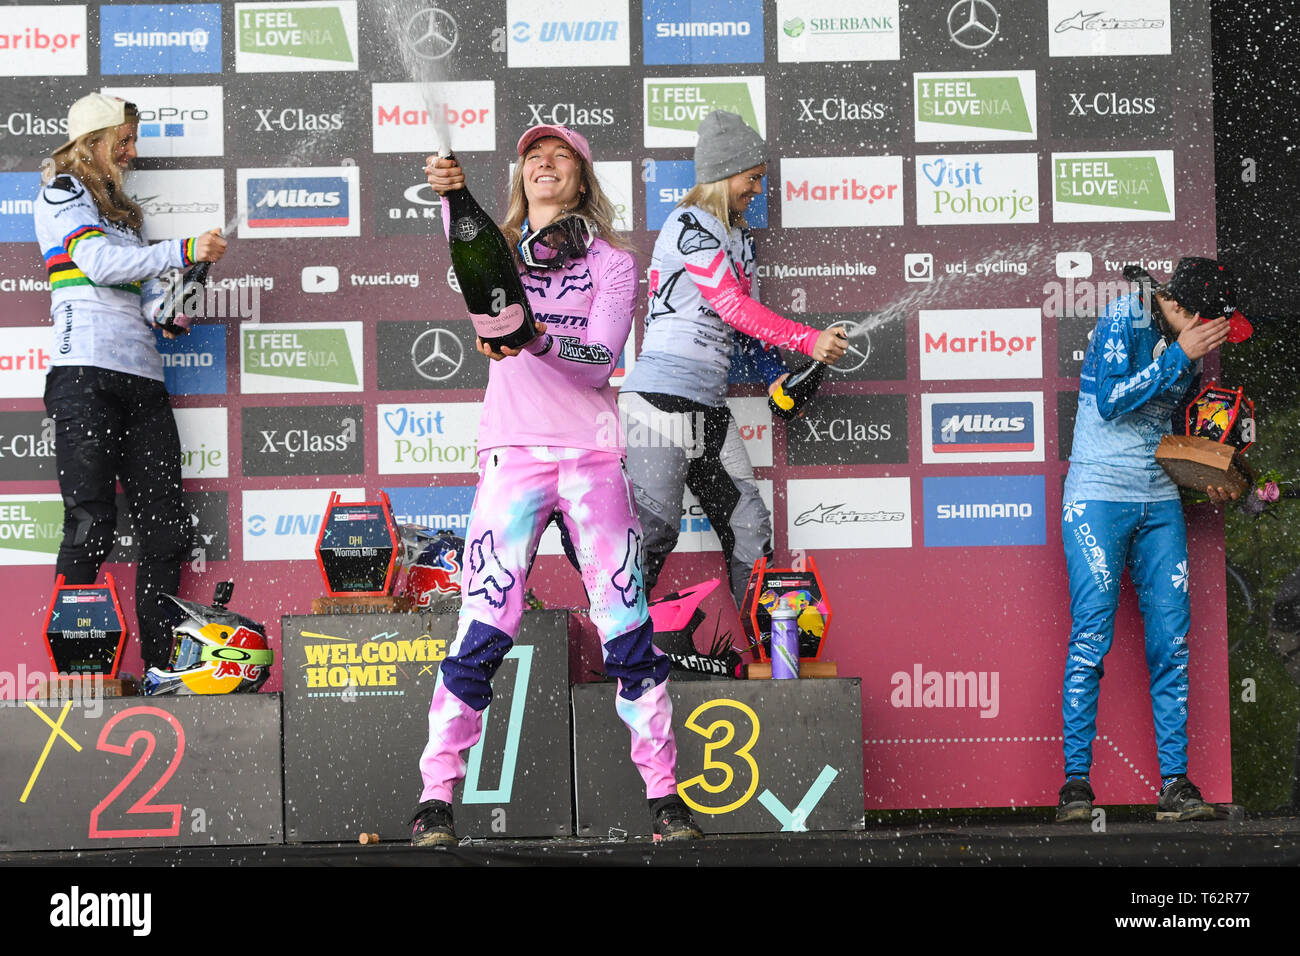 From left to right second Rachel Atherton of Great Britain, first Tahnee Seagrave Great Britain, third Tracey Hannah and fourth Monika Hrastnik of Slovenia are seen on the podium after the UCI Mountain Bike World Cup Finals in Maribor. Stock Photo